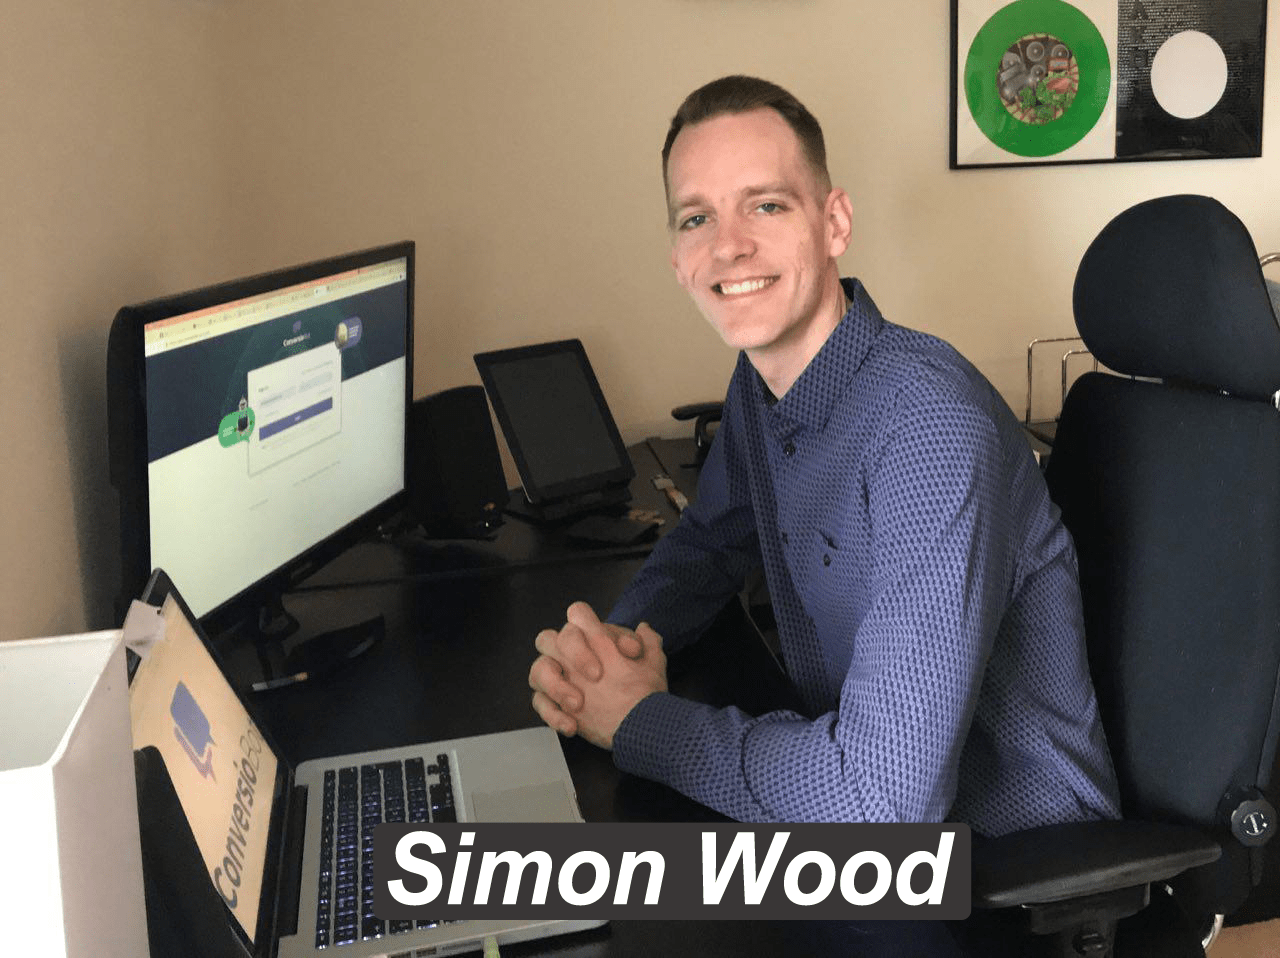 Download Simon Wood - ConversioBot Done For You Pro (Training Only)